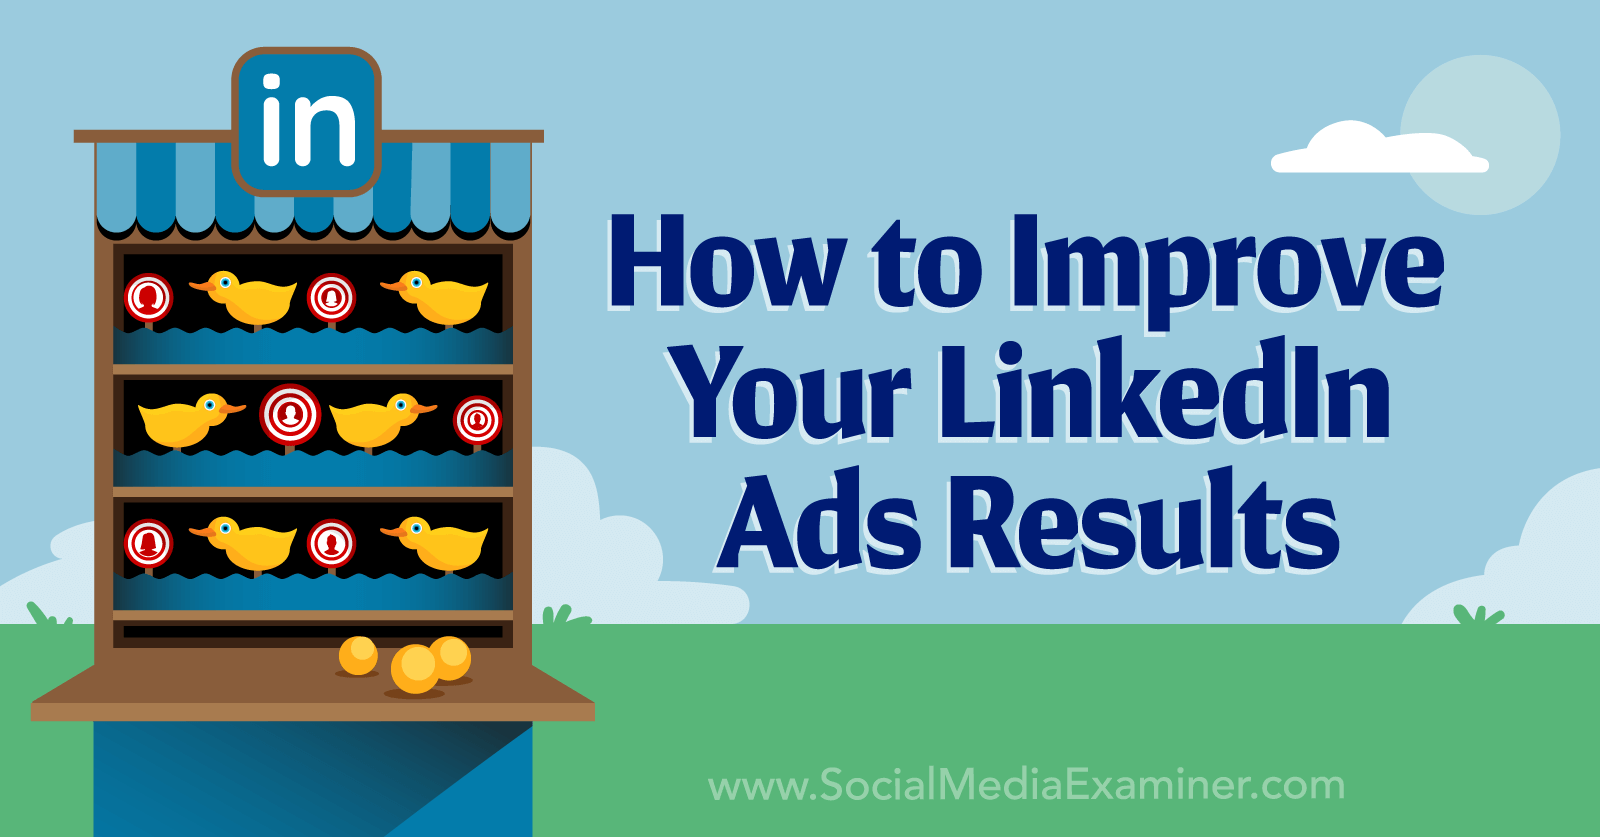 How to Improve Your LinkedIn Ads Results by Social Media Examiner